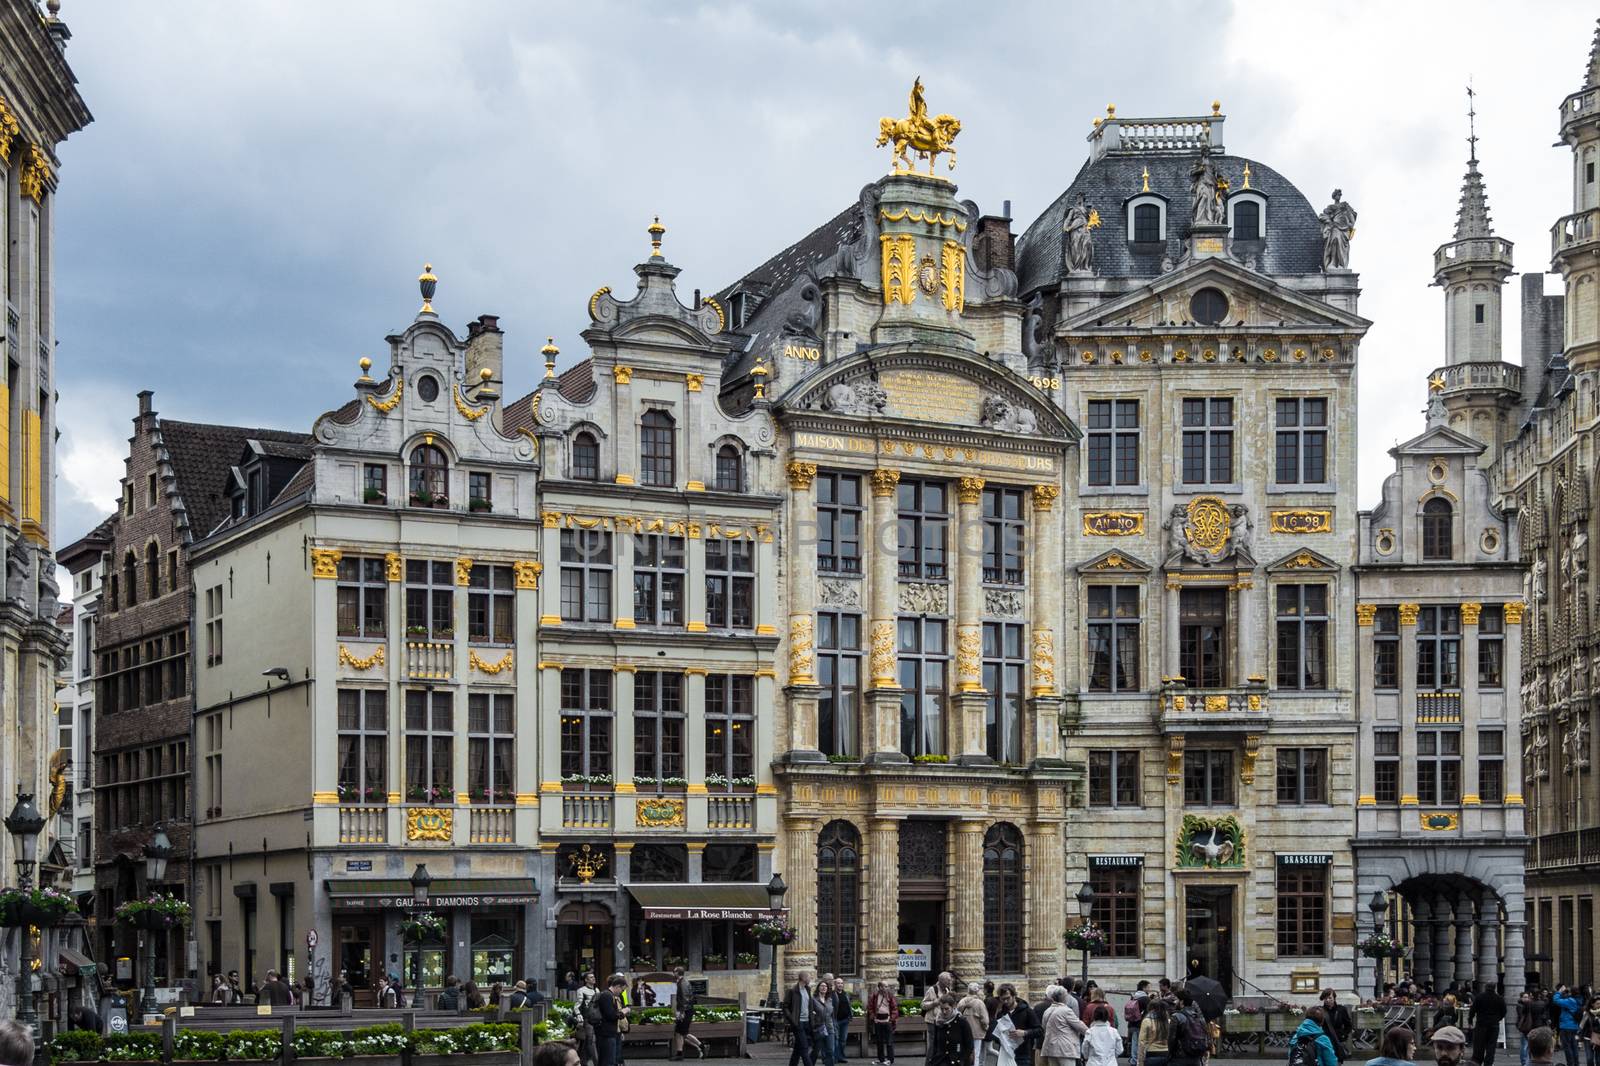 Golden Buildings at the Grand Place in Brussels